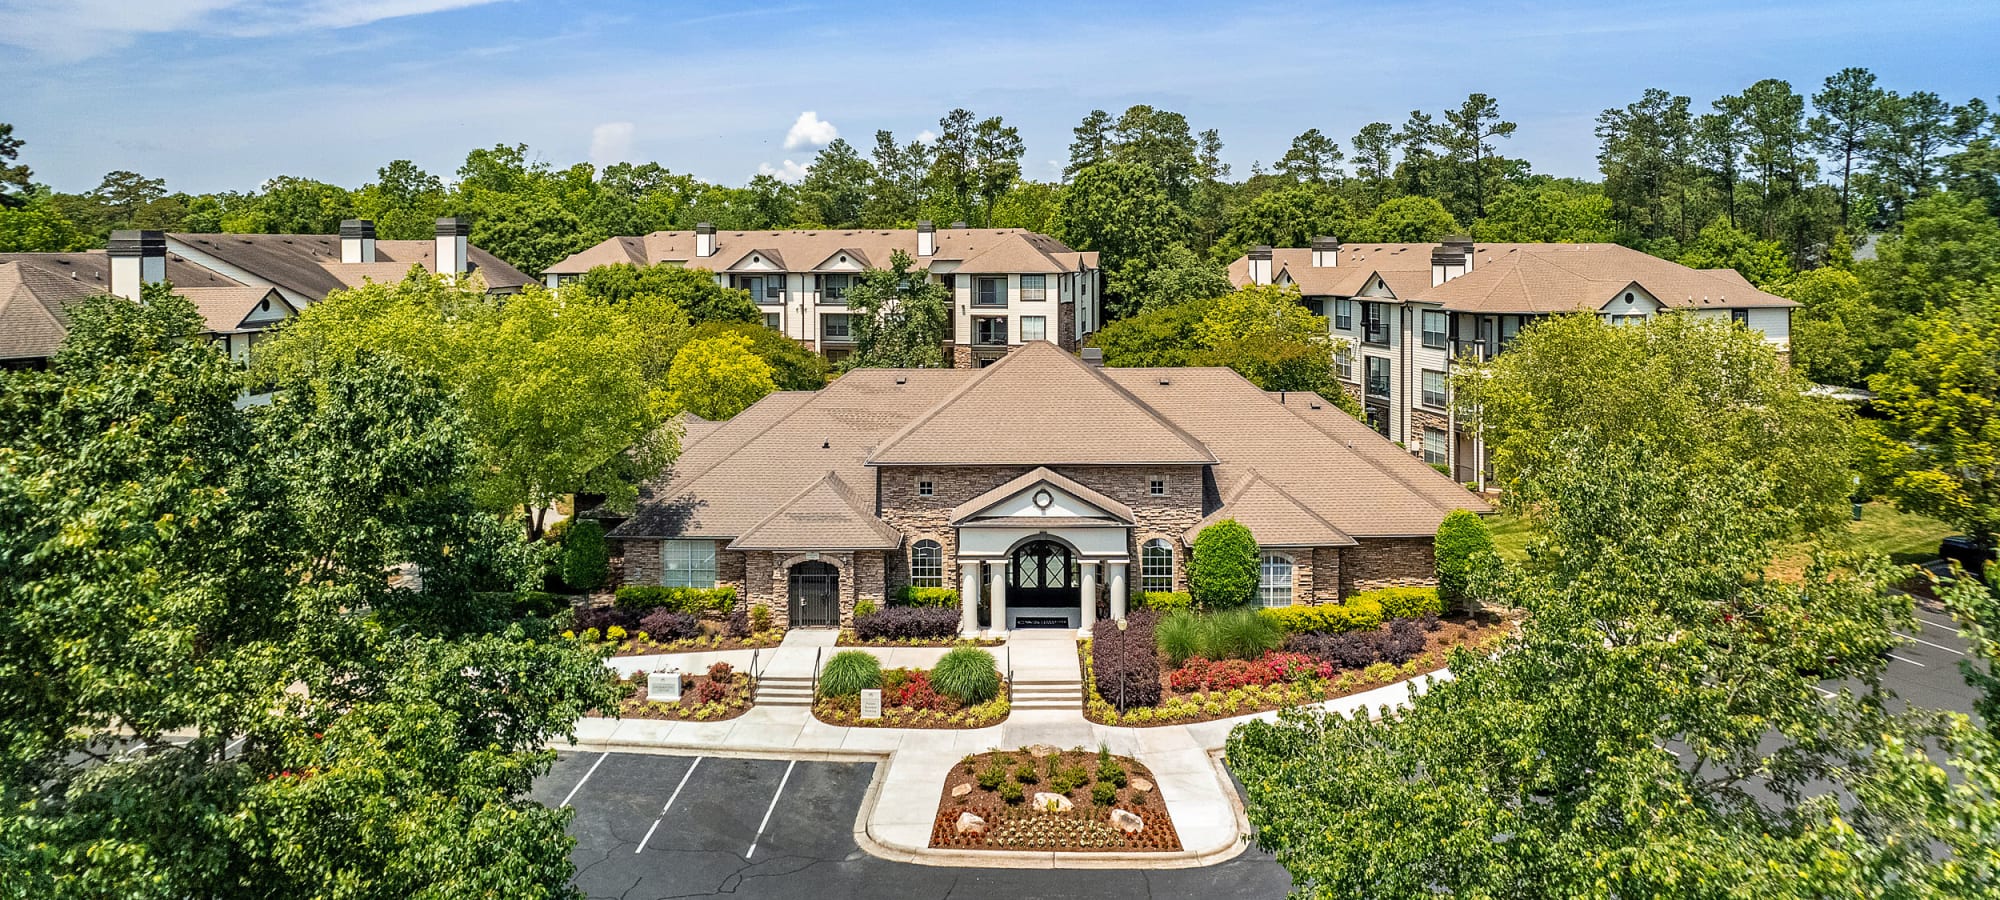 Schedule a tour of Marquis at Carmel Commons in Charlotte, North Carolina